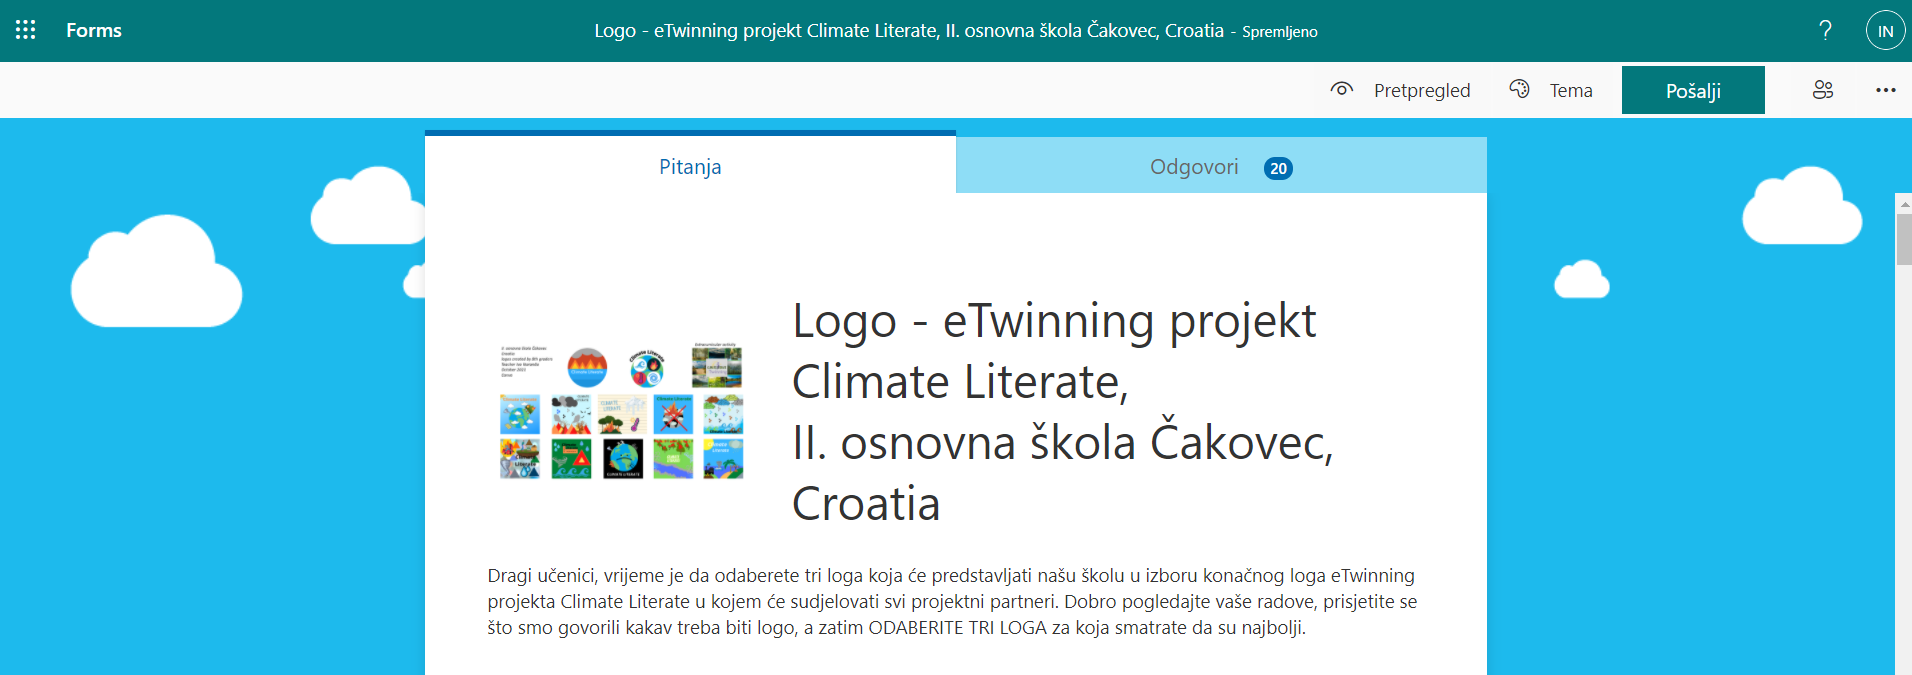 eTwinning project Climate Literate - MS Forms - logo